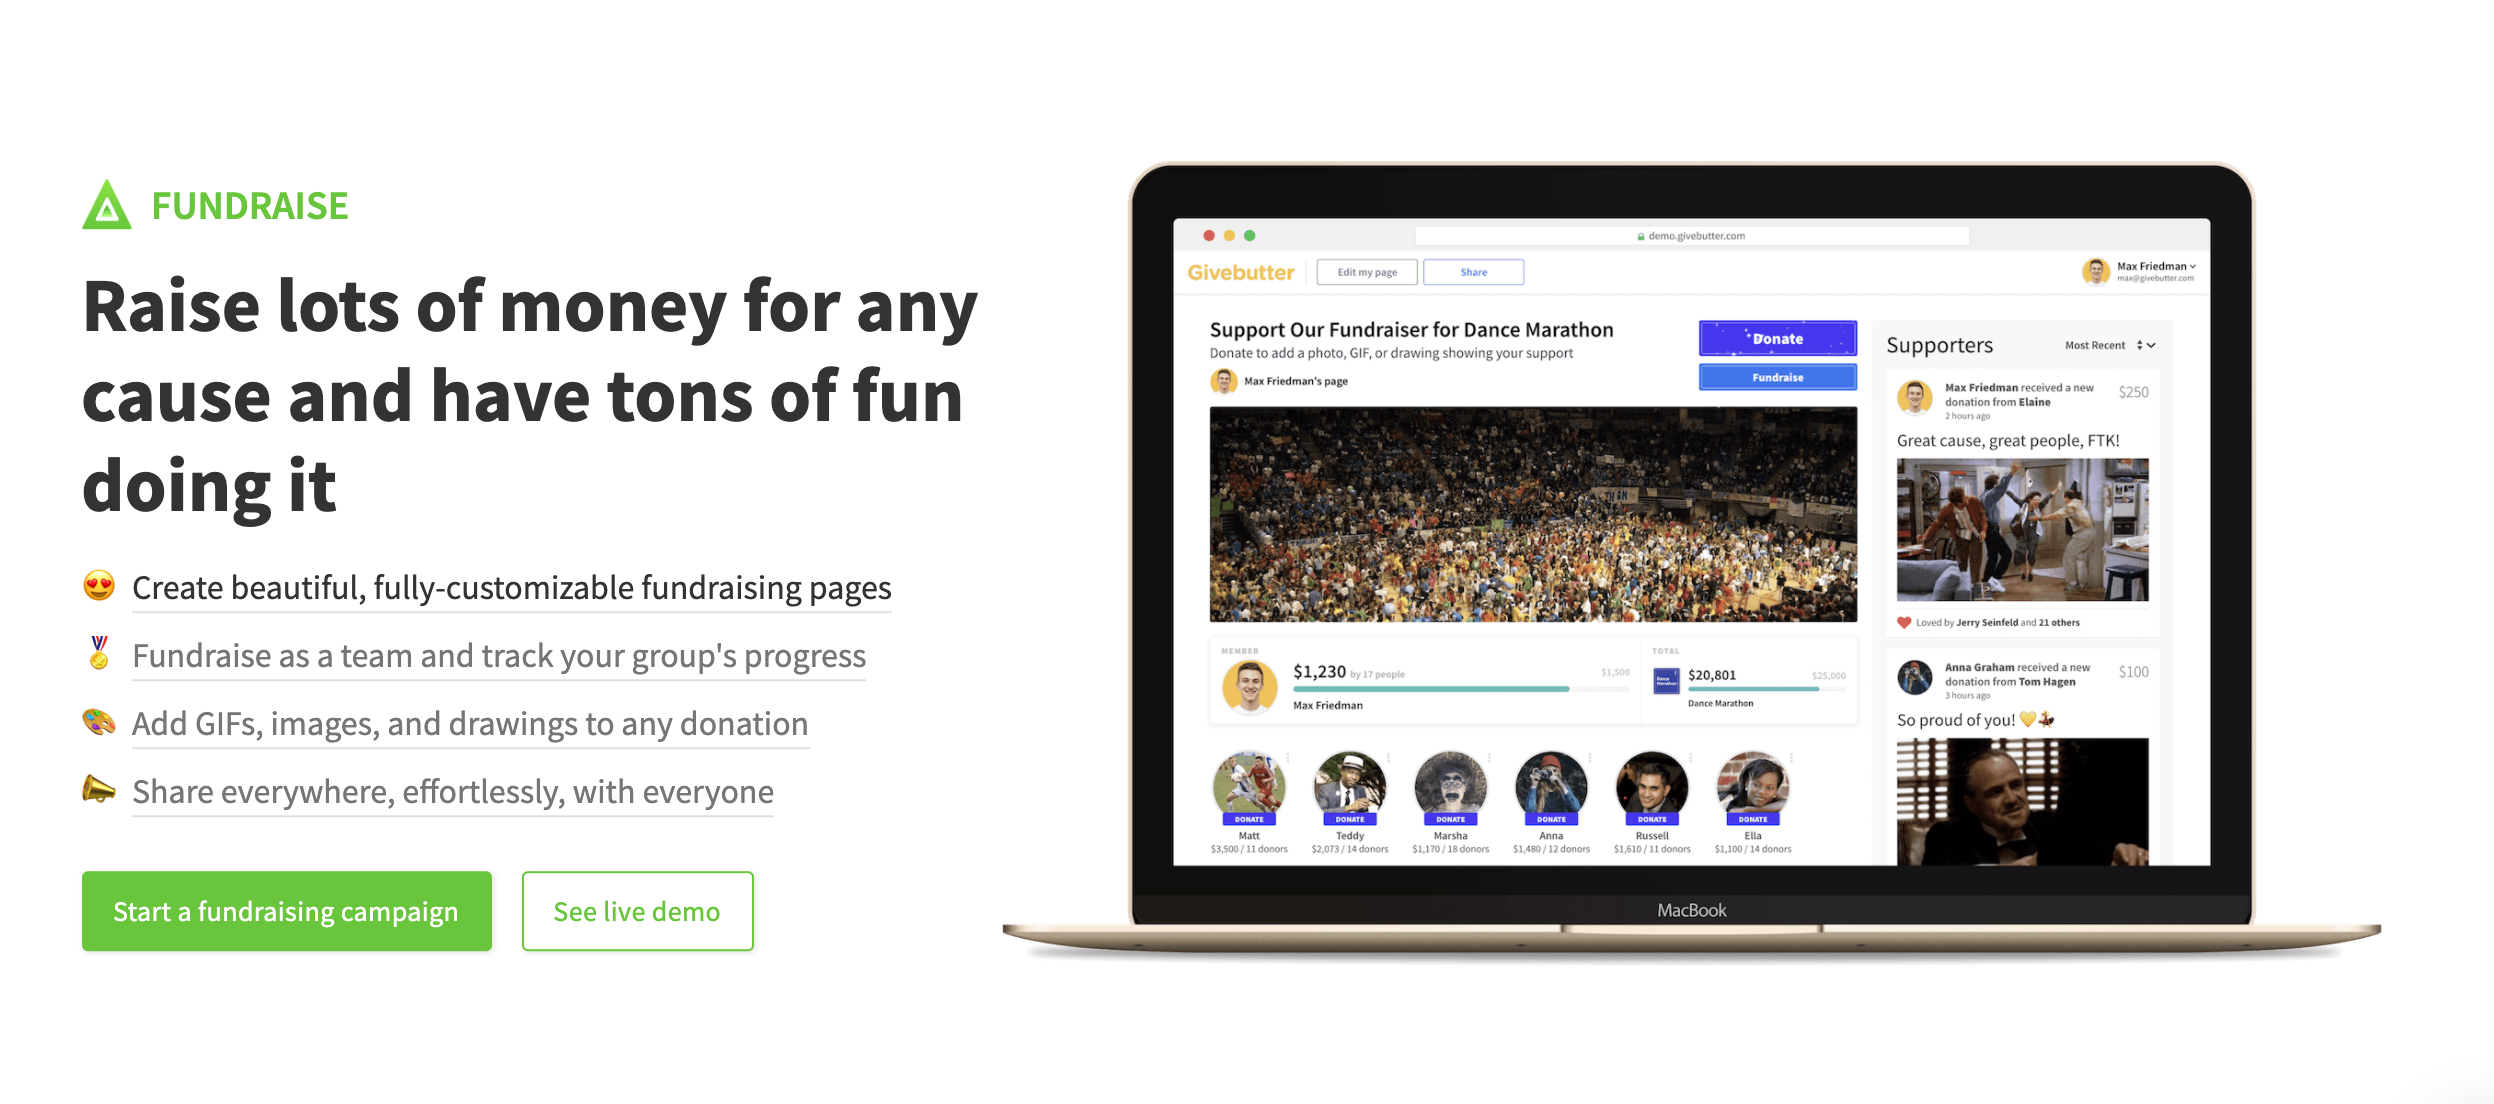 Givebutter: The All-In-One Fundraising Platform